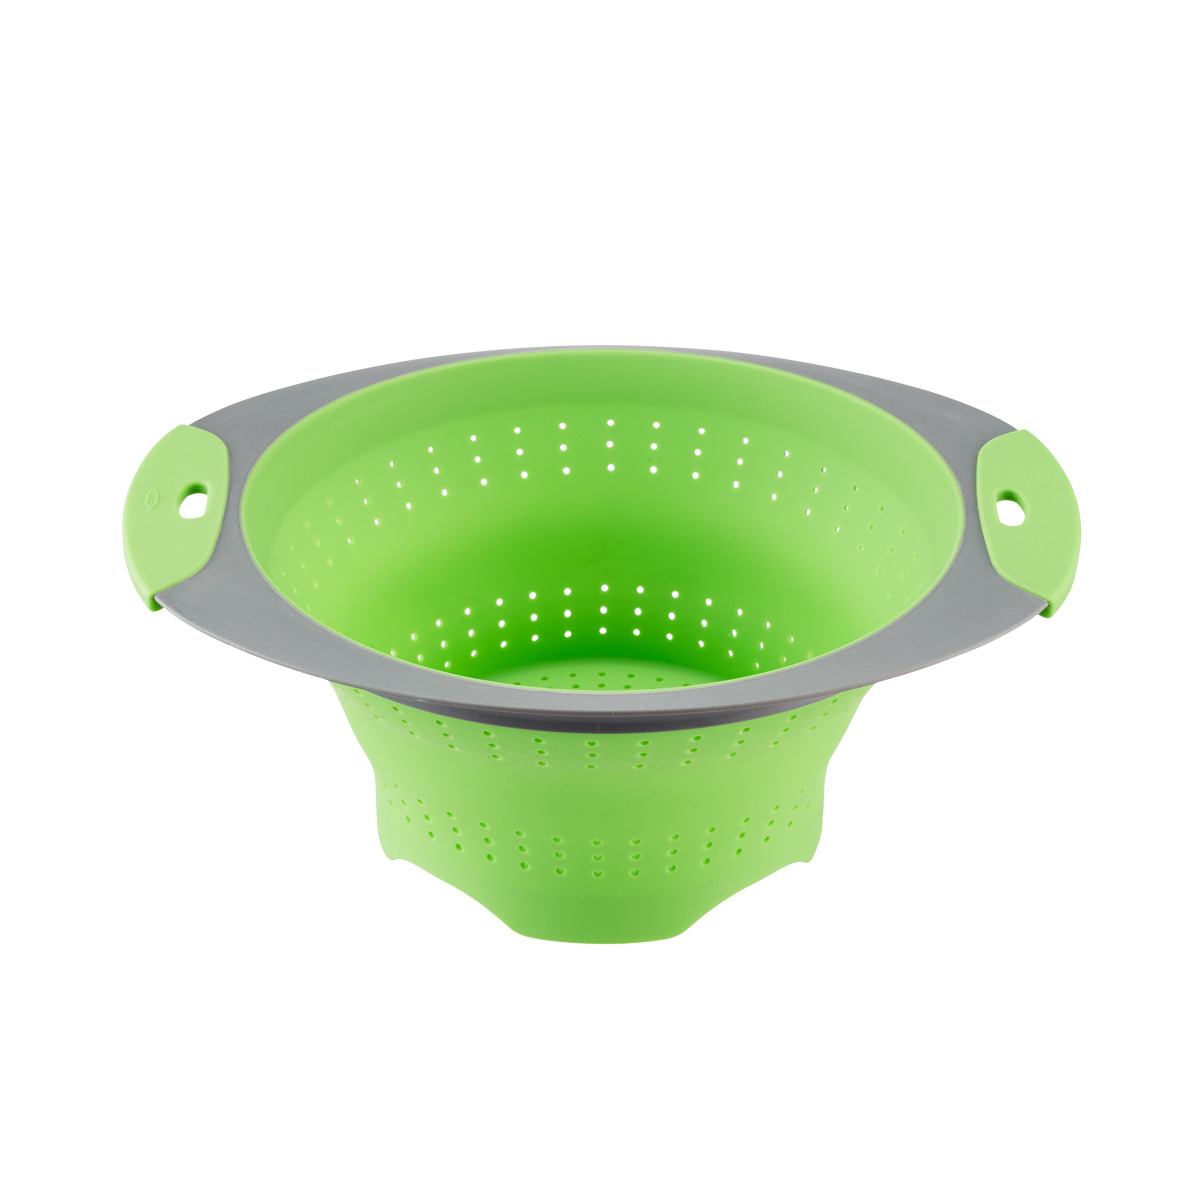 https://images.containerstore.com/catalogimages/333541/10073262-oxo-collapsible-colander-3..jpg